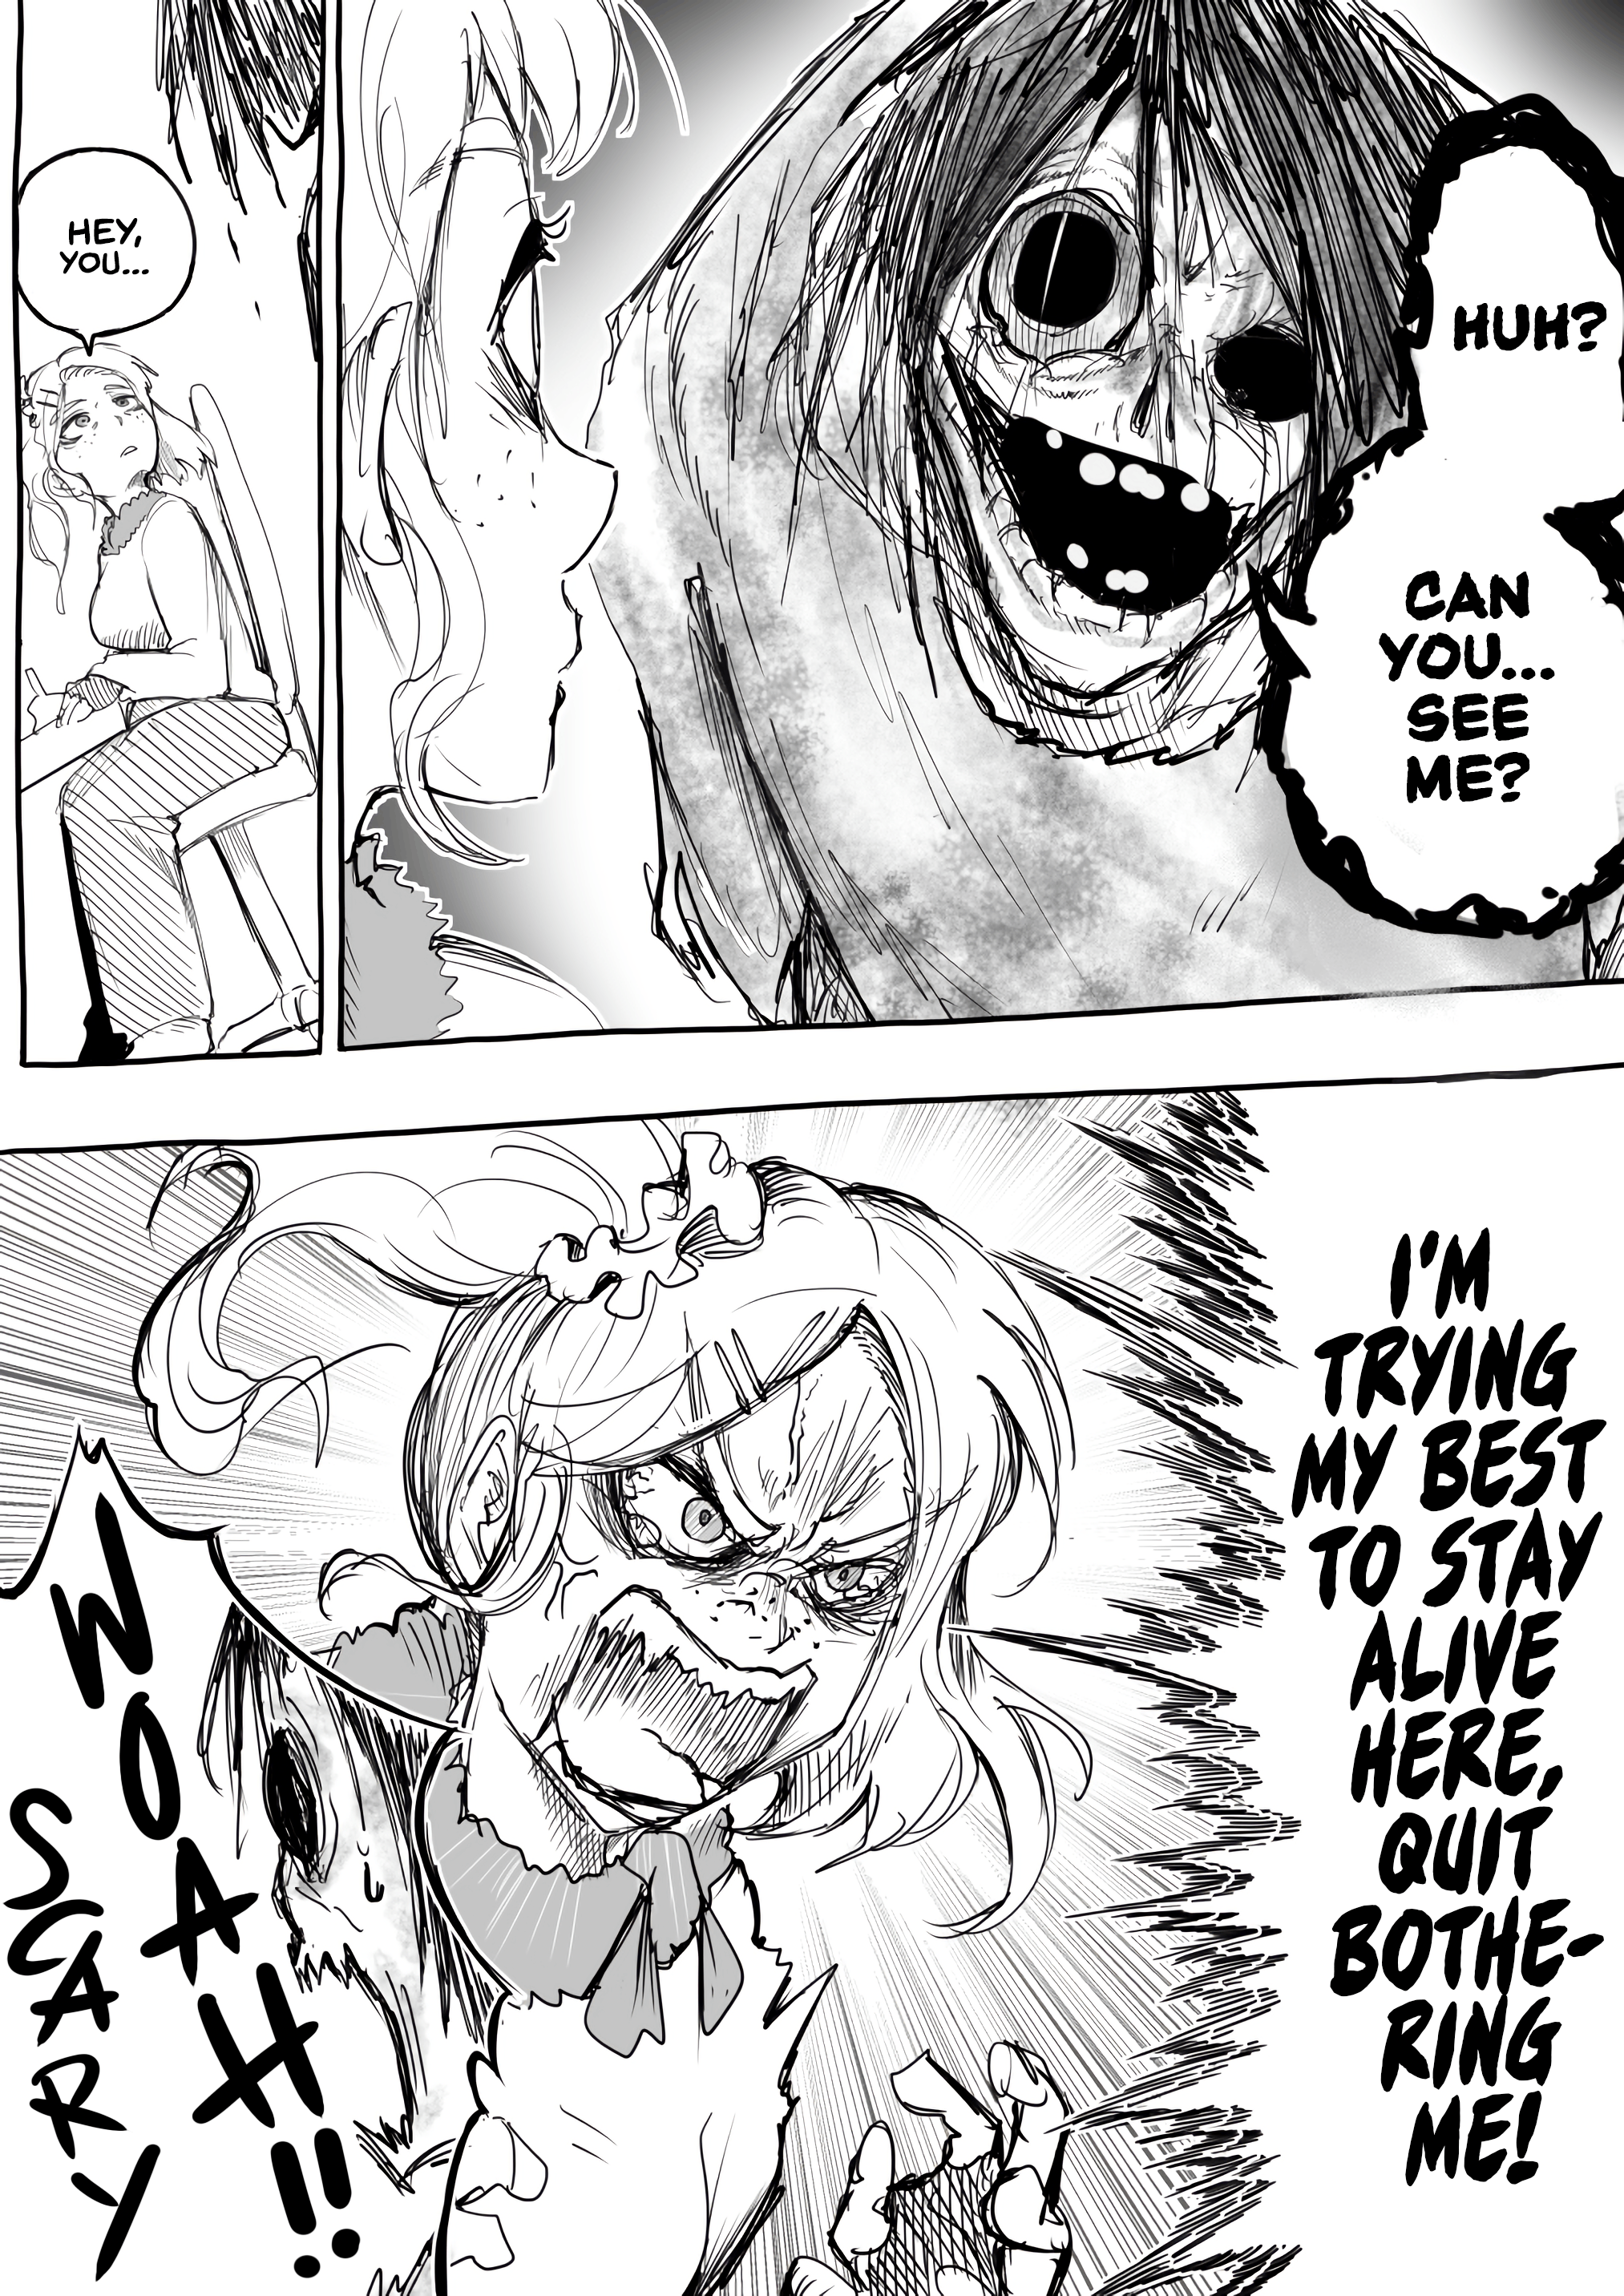 A Mangaka At The Night Before The Deadline - Page 2